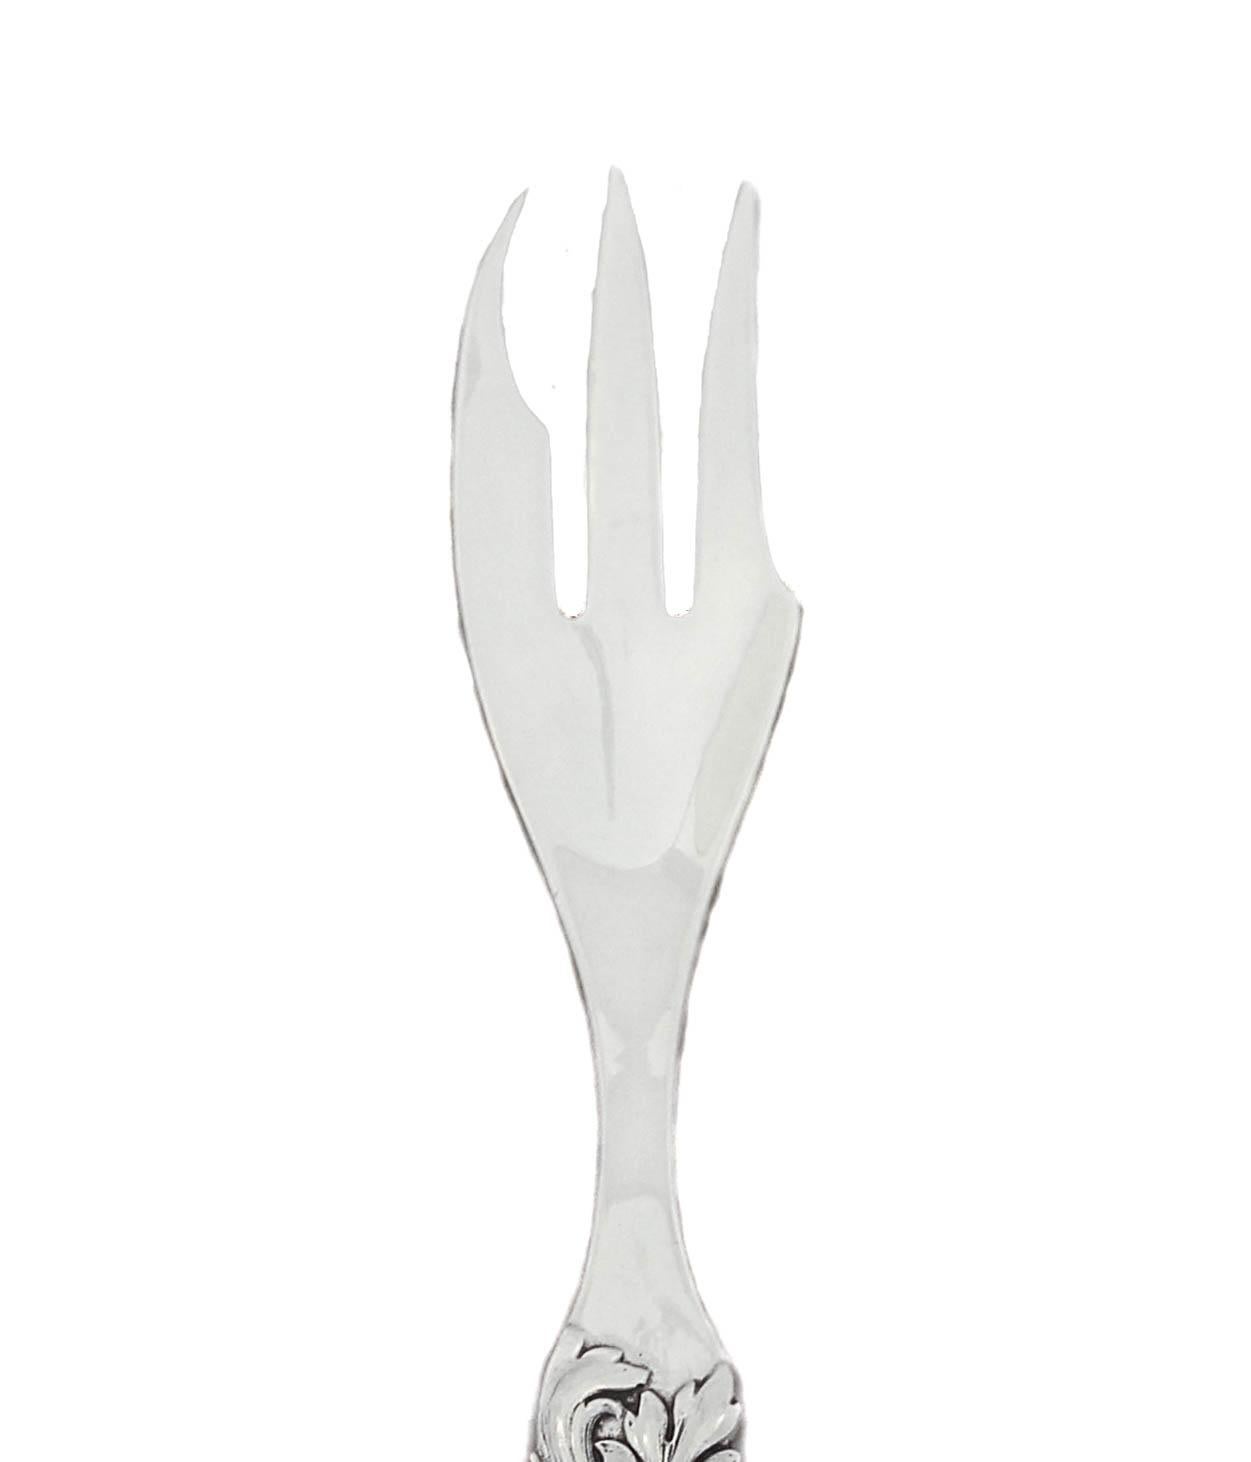 This sterling silver serving fork is a great mix between sleek and ornate. The handle has a beautiful design of flowers and leaves while the remainder is clean and modern. The extra long handle is perfect for large serving trays.
 